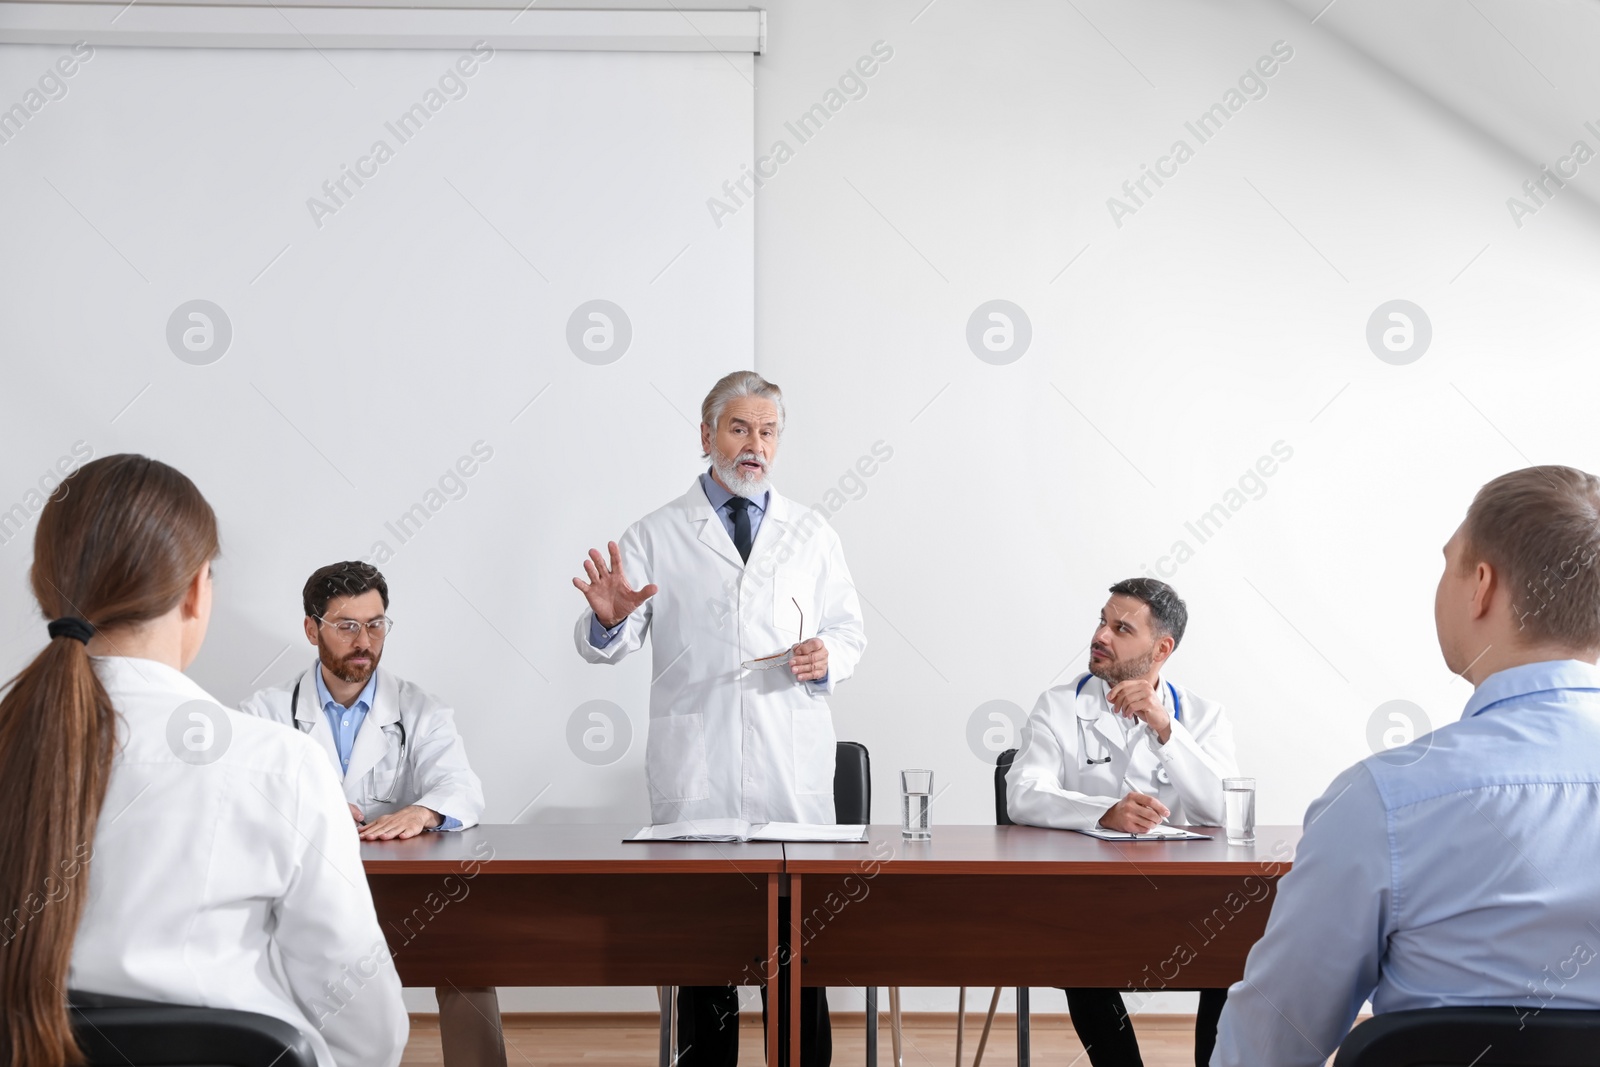 Photo of Senior doctor having discussion with audience during medical conference in meeting room